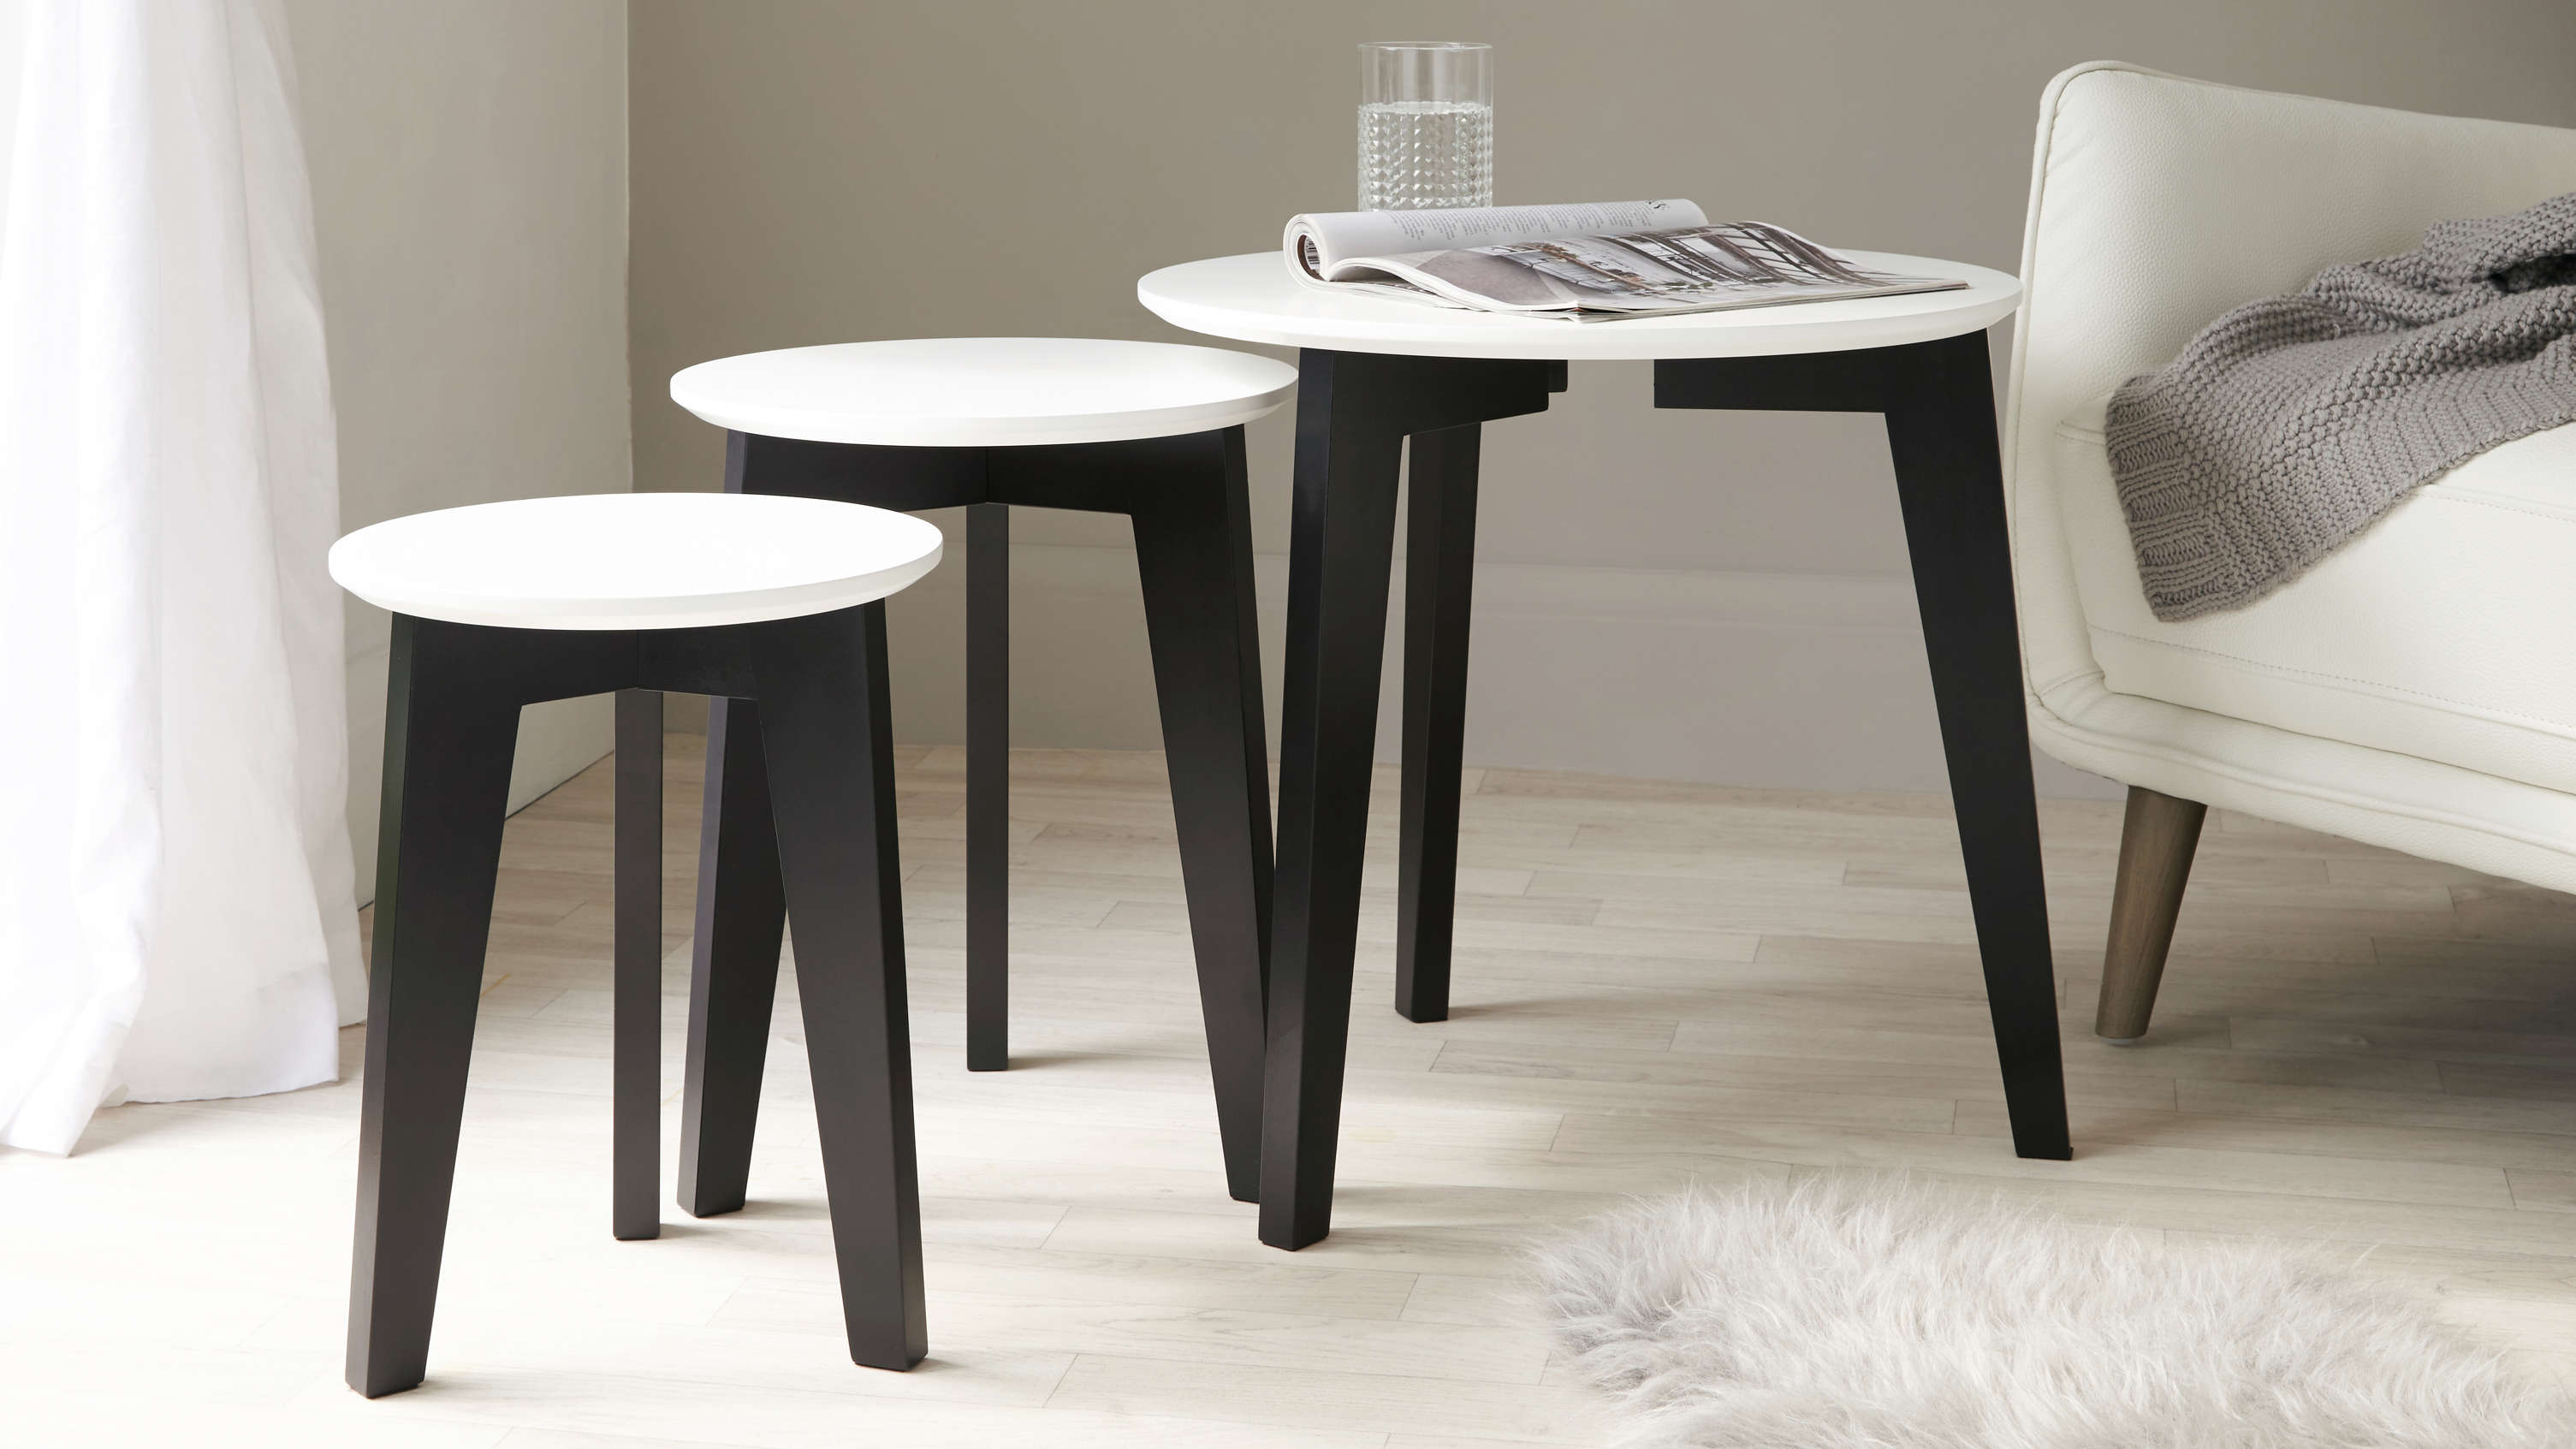 Modern Black and White Nest of Tables